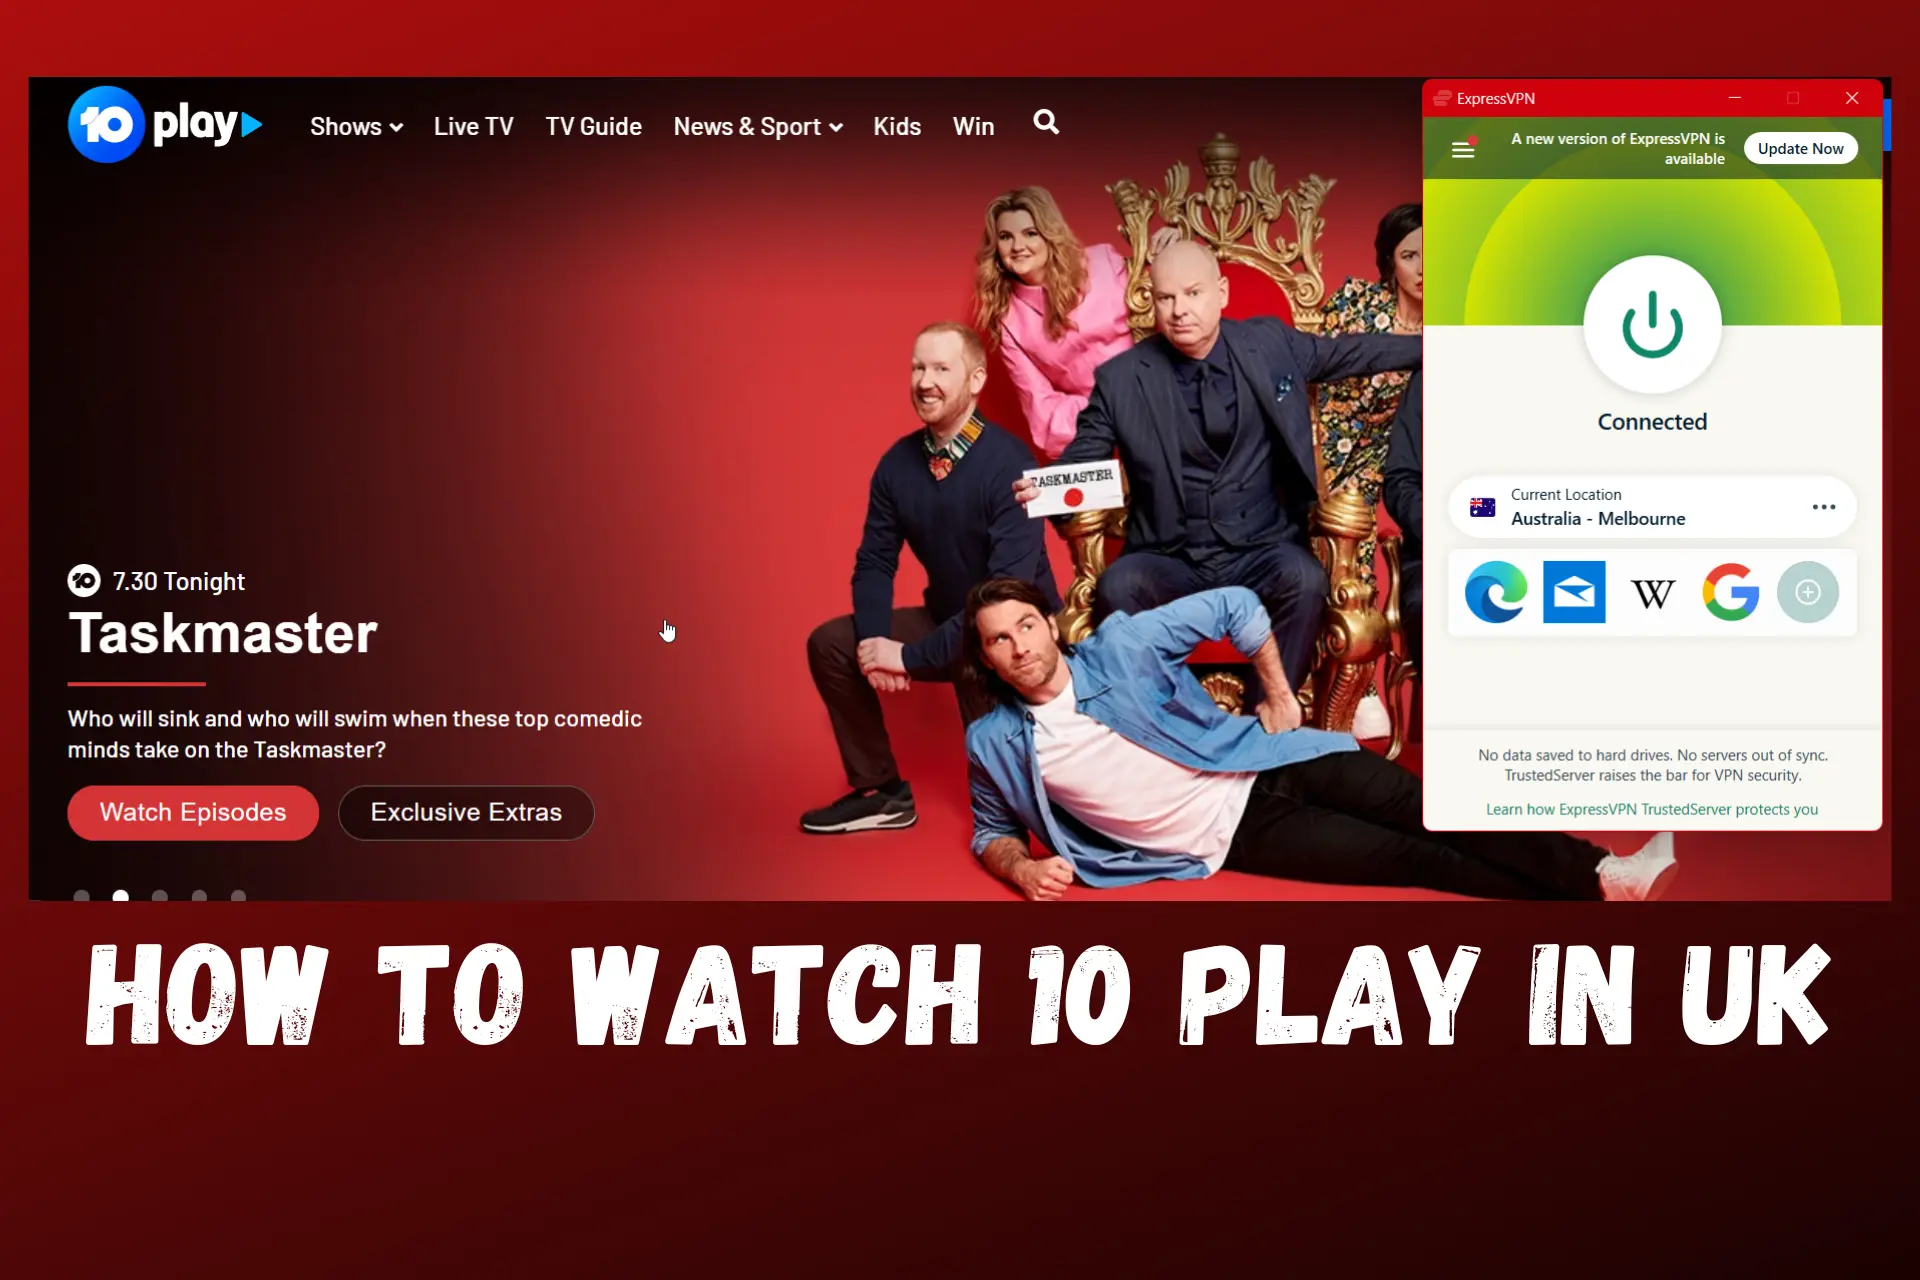 watch 10 play in uk